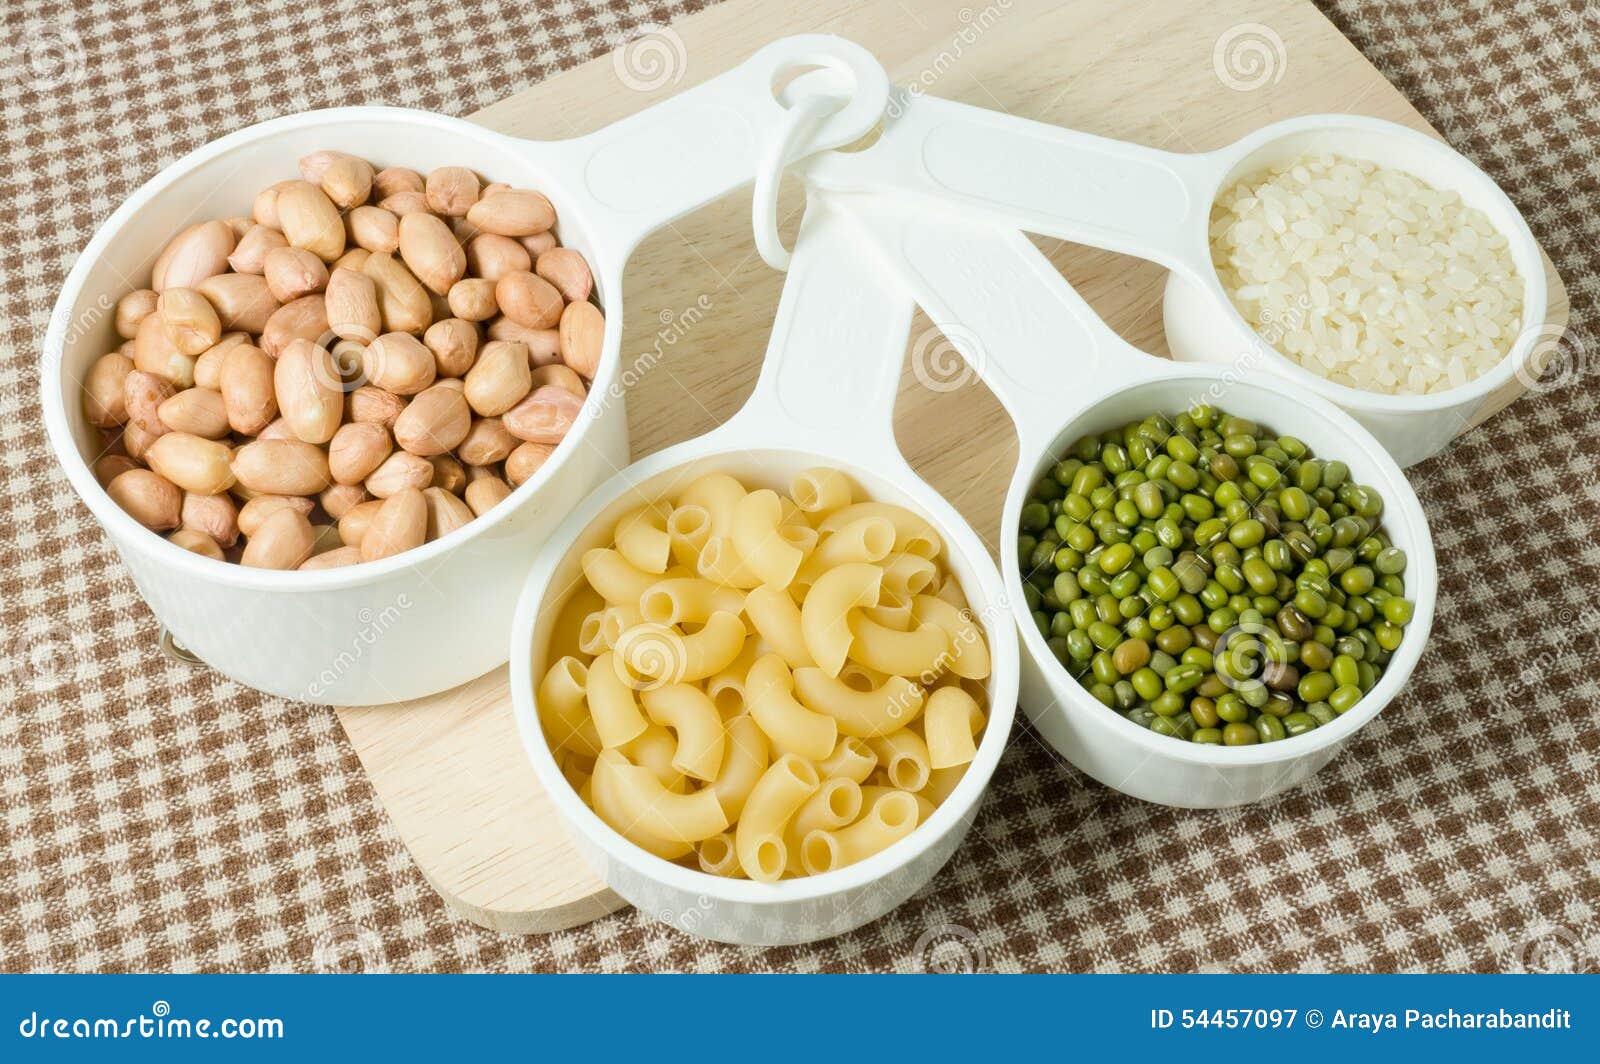 Pasta, Rice, Peanuts and Mung Beans in Measuring Spoons Stock Image - Image of nutshell, measure